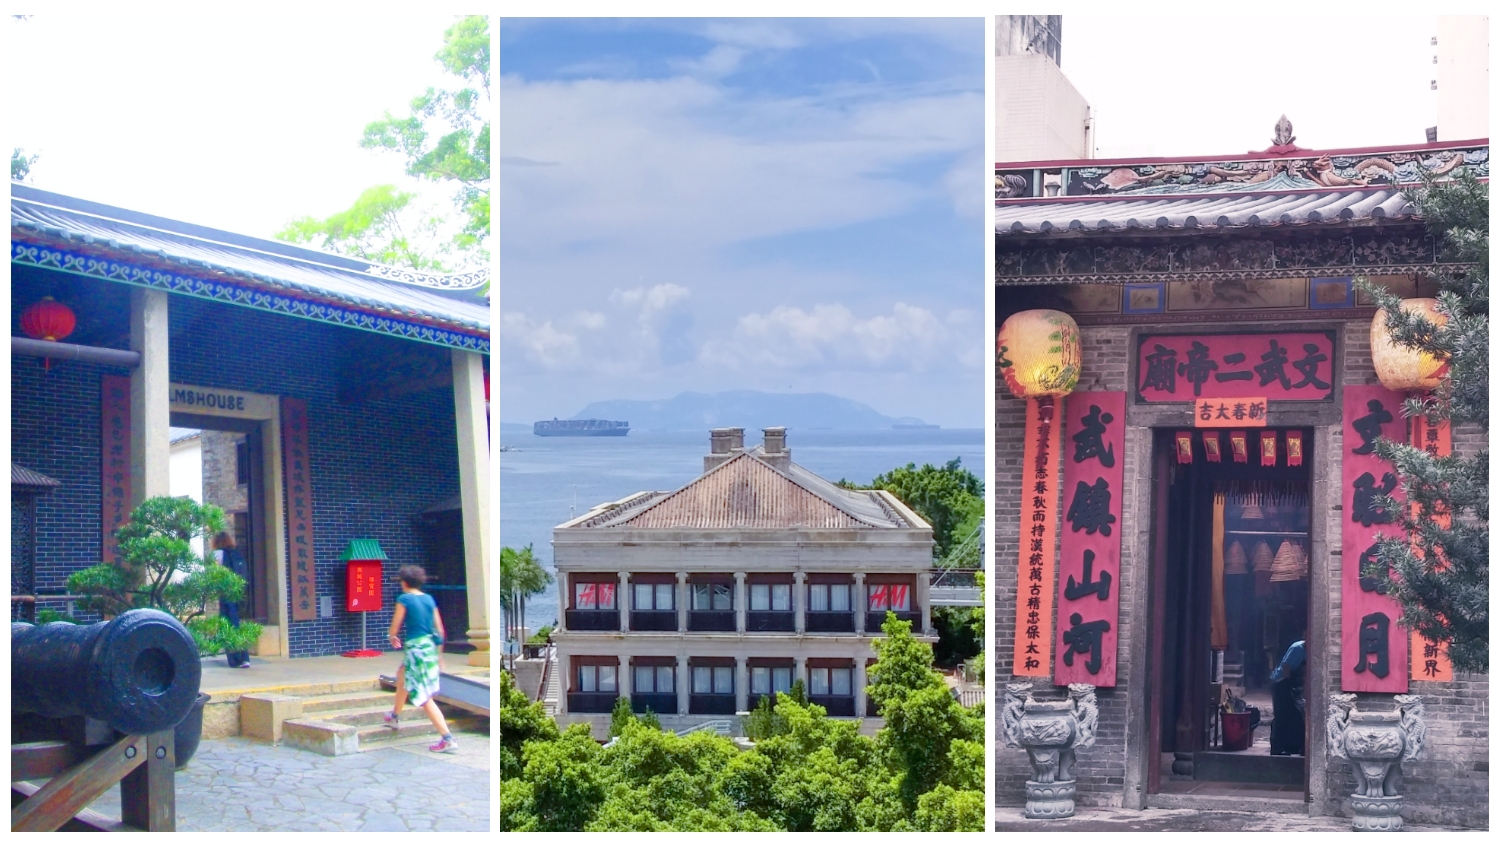 What are the sightseeing points with Hong Kong colonial history?